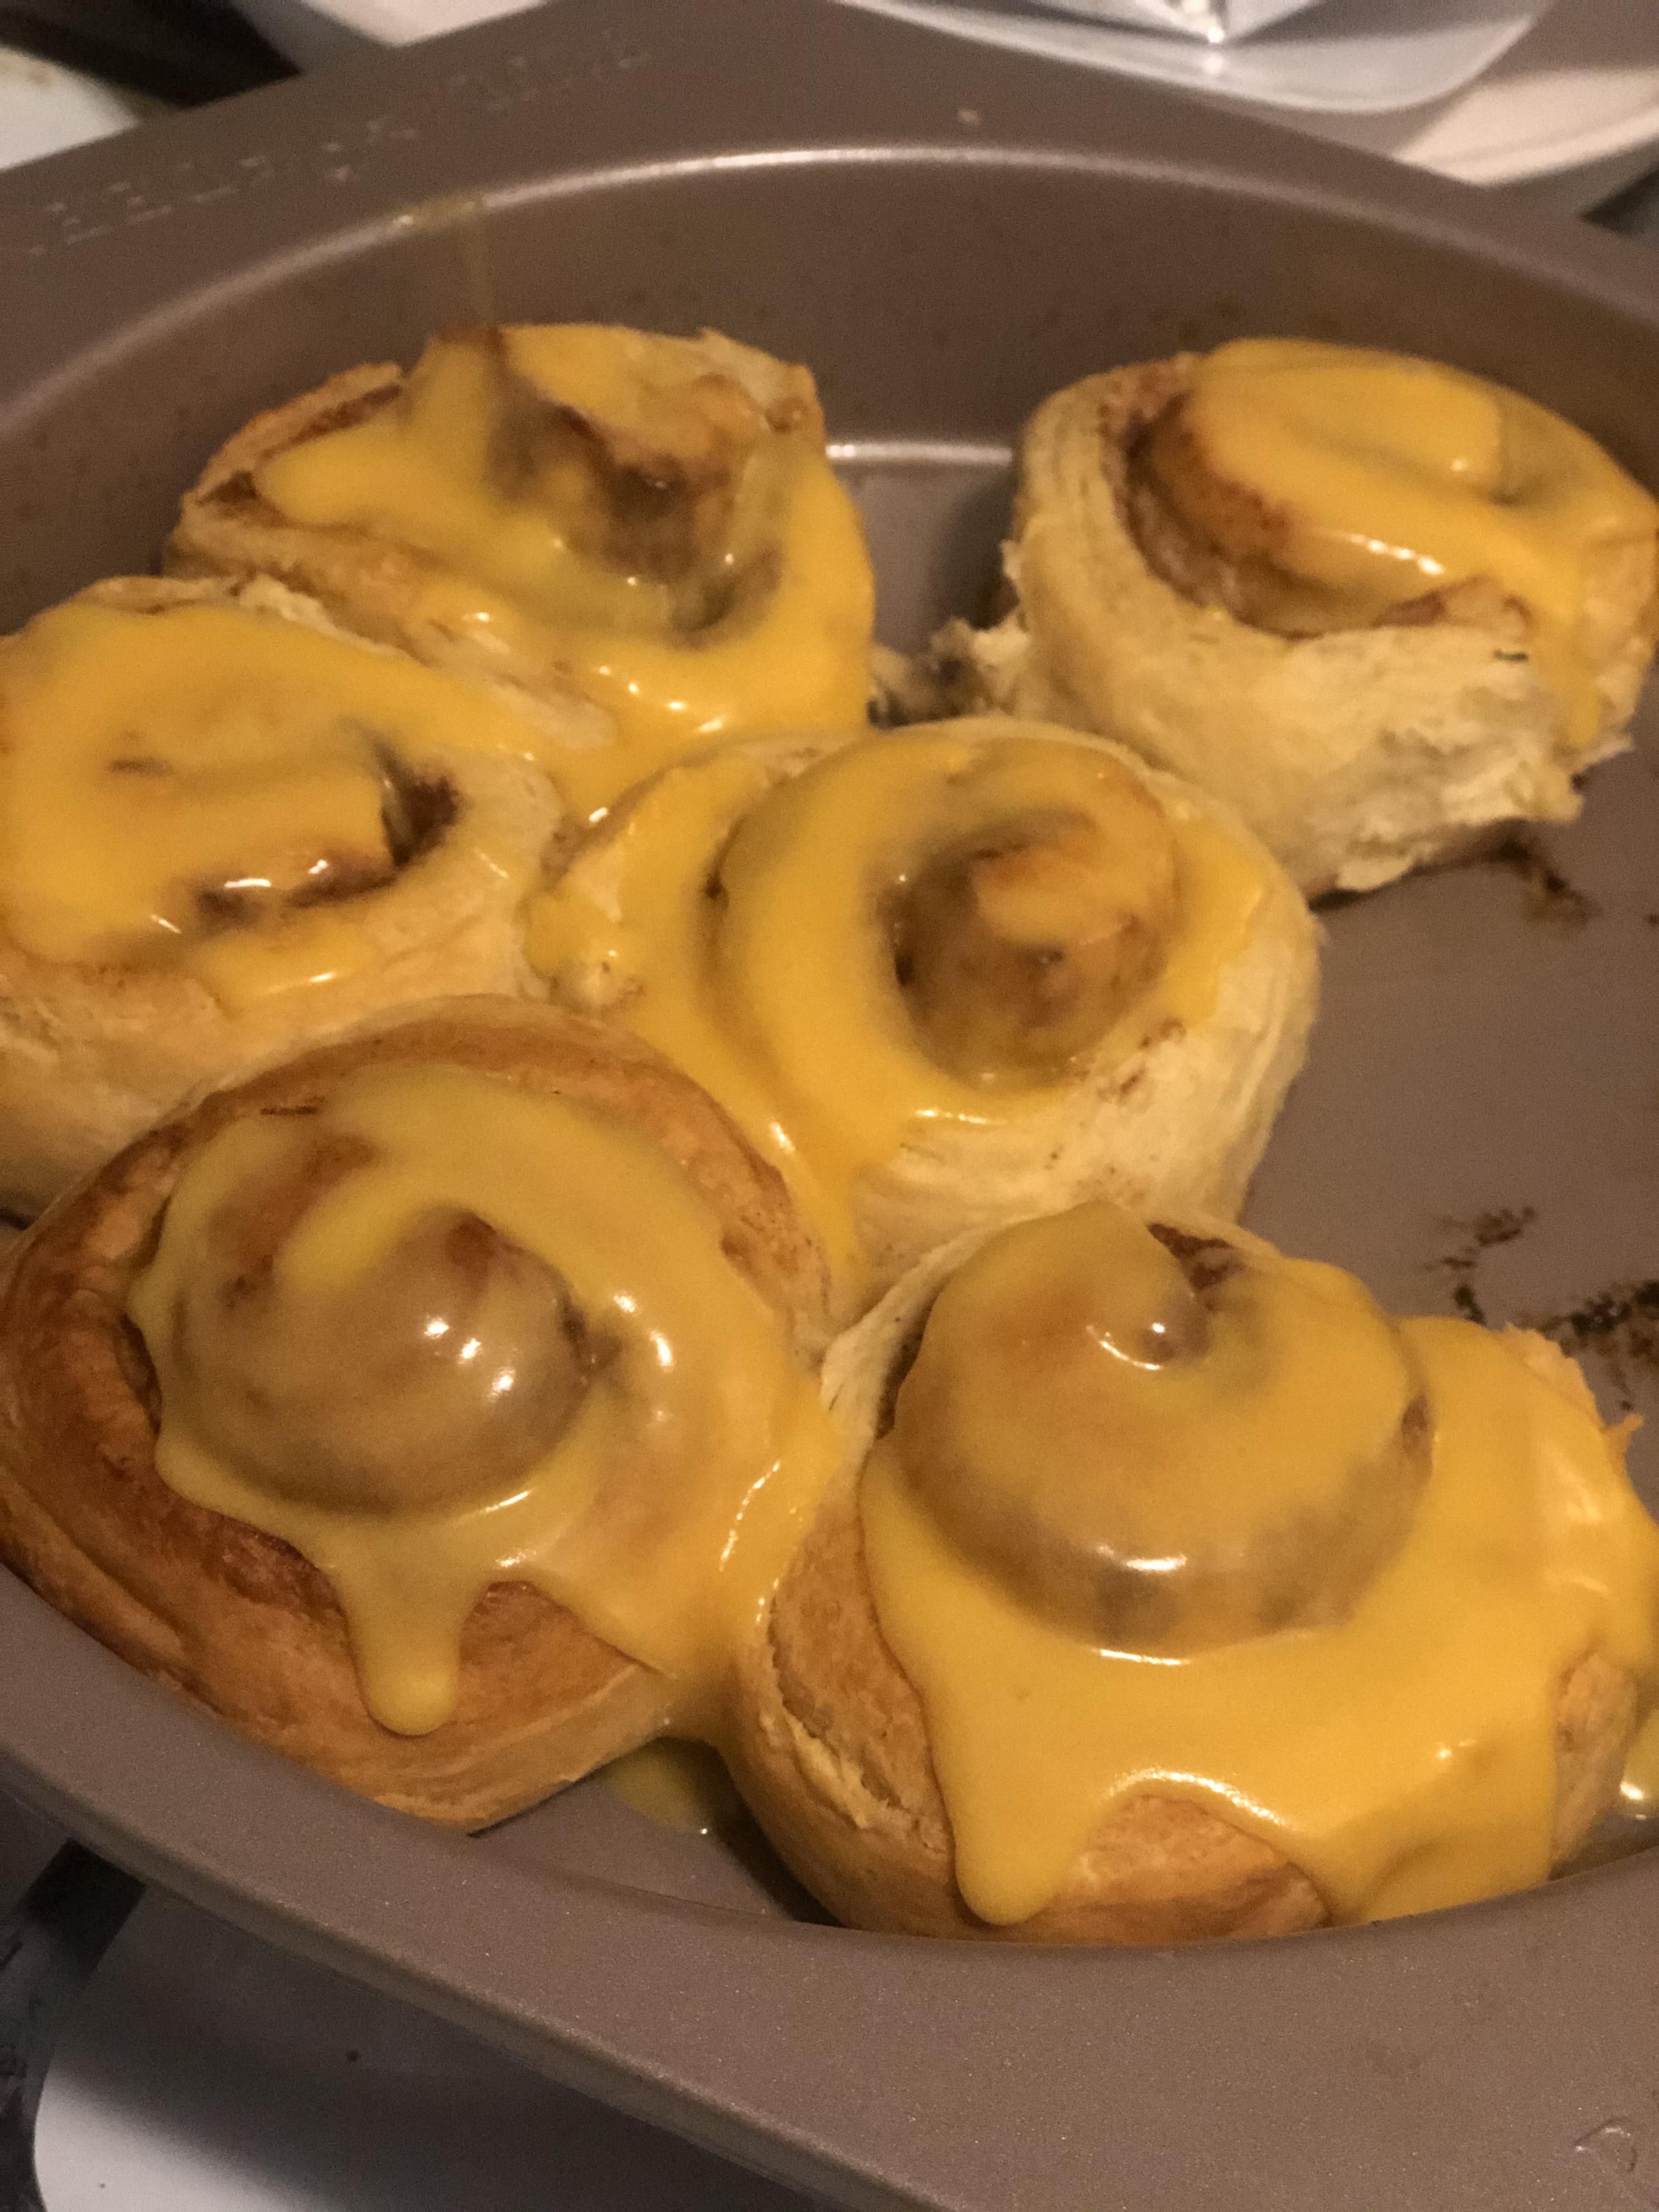 My Husband wanted a sweet treat. I made orange rolls. To keep it interesting, one of these has nacho cheese on it.